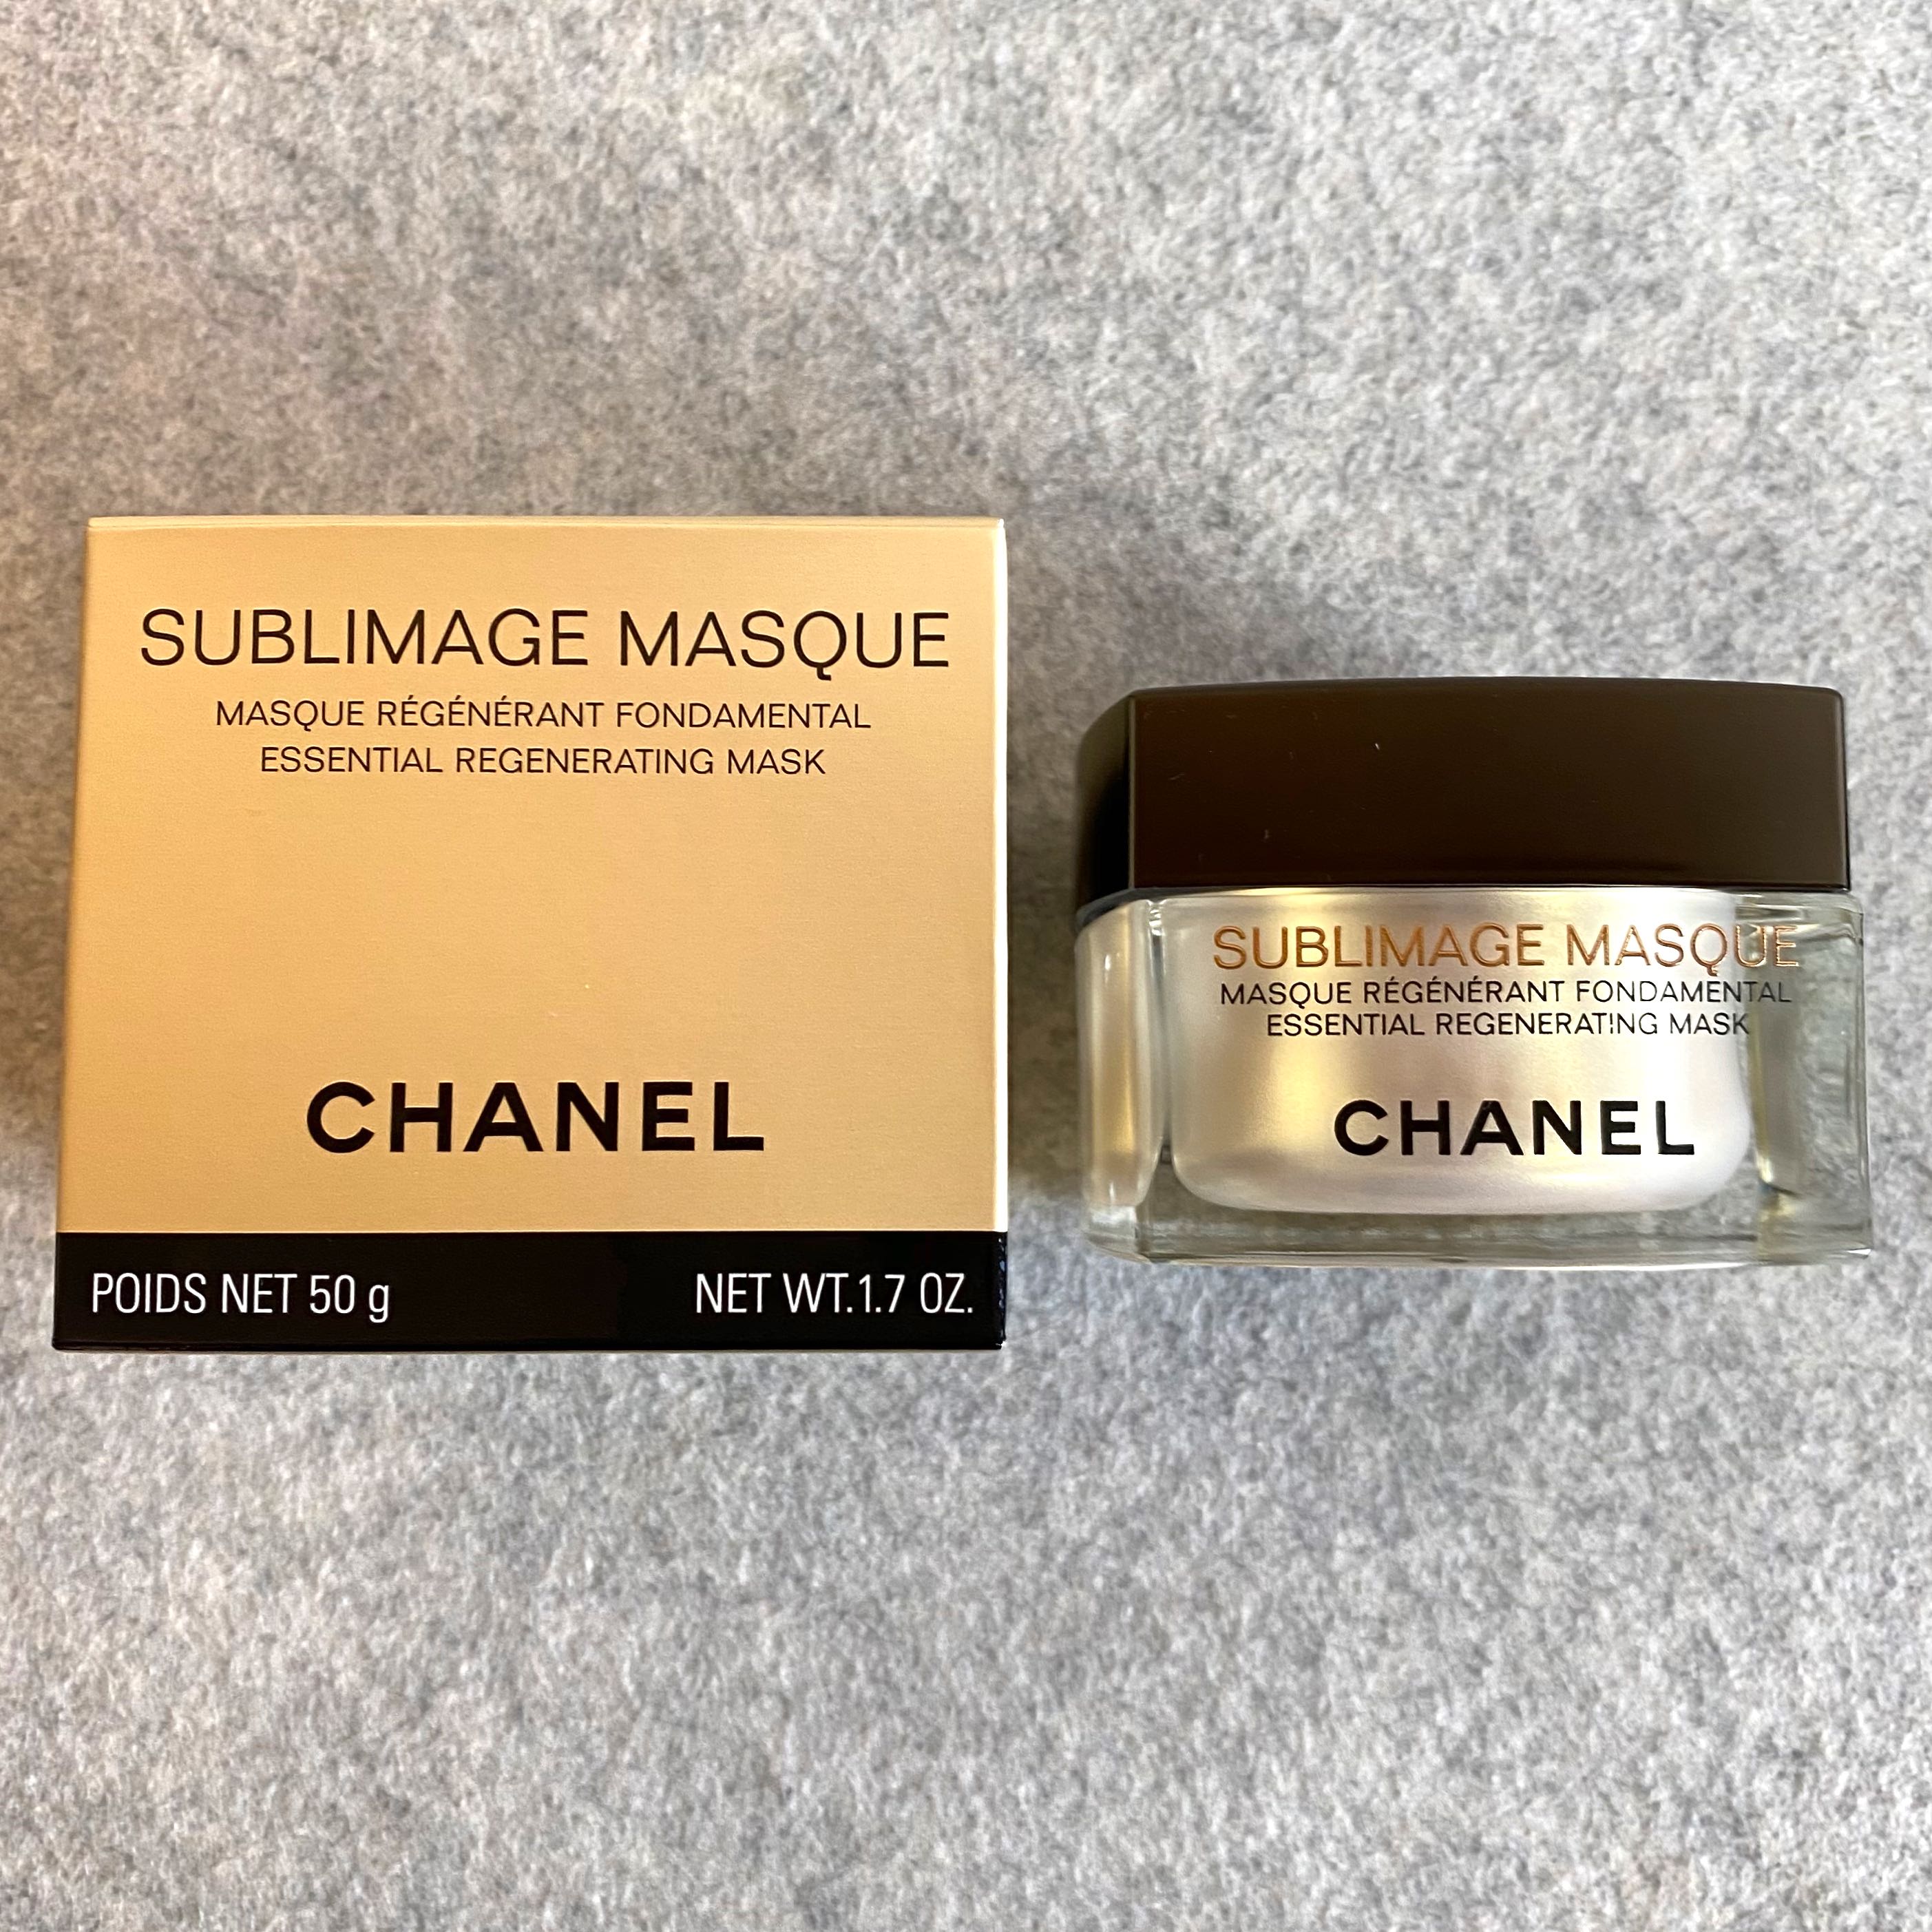 Cheap Chanel Sublimage Masque / Chanel Face Mask / Chanel Sublimage ...